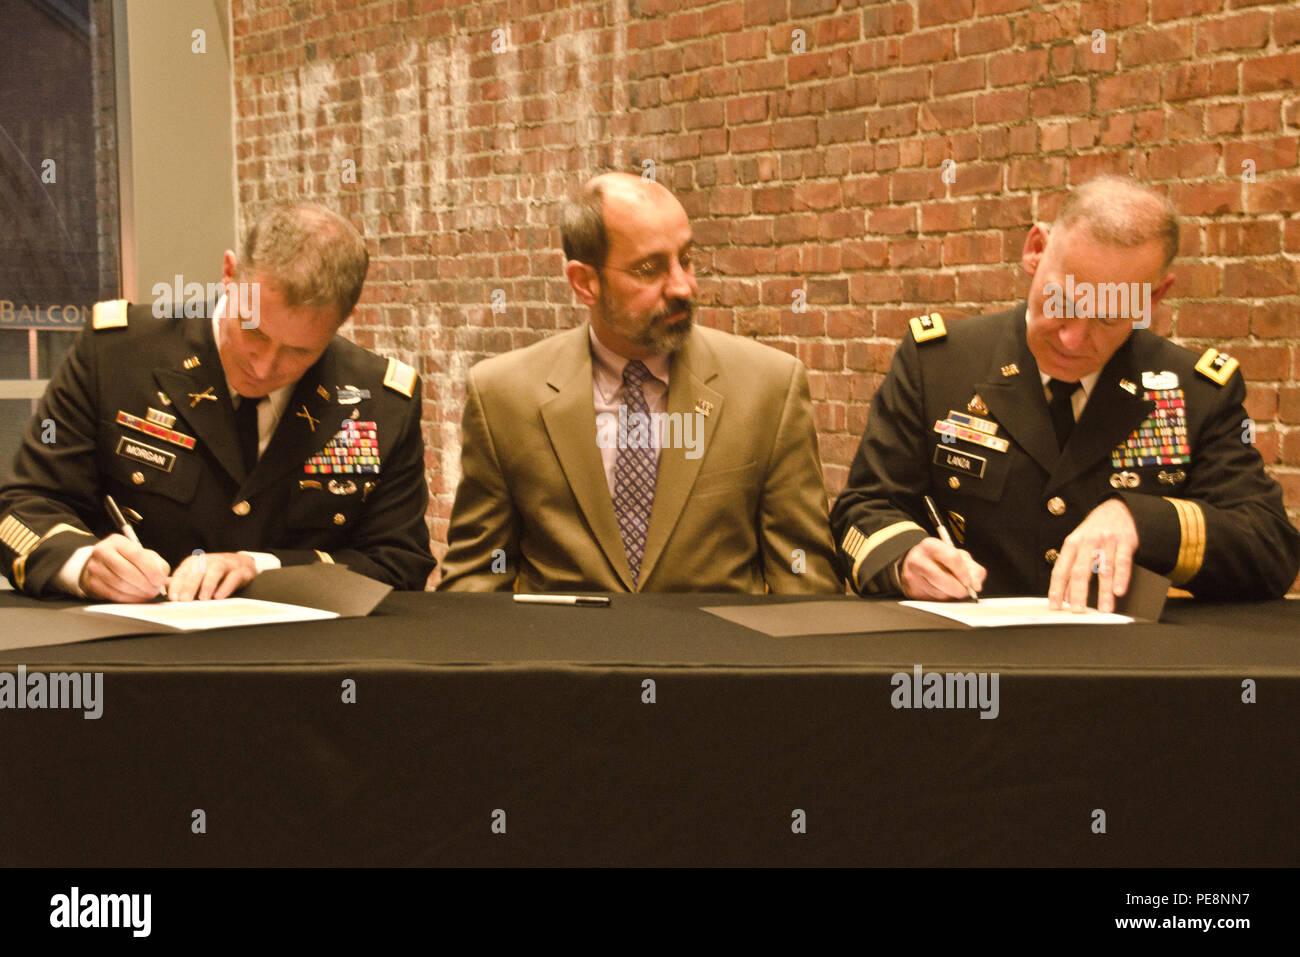 Col. Daniel S. Morgan, commander, Joint Base Lewis-McChord, left, Mark A. Pagano, chancellor, University of Washington-Tacoma, center, and Lt. Gen. Stephen R. Lanza, commanding general, I Corps, JBLM, right, come together to sign partnership resolutions at the UW-T, Oct. 29, 2015.  Both JBLM and I Corps signed partnership resolutions with the UW-T agreeing to become a model university and military institutional partnership. (U.S. Army photo by Sgt. Jasmine Higgins, 28th Public Affairs Detachment) Stock Photo